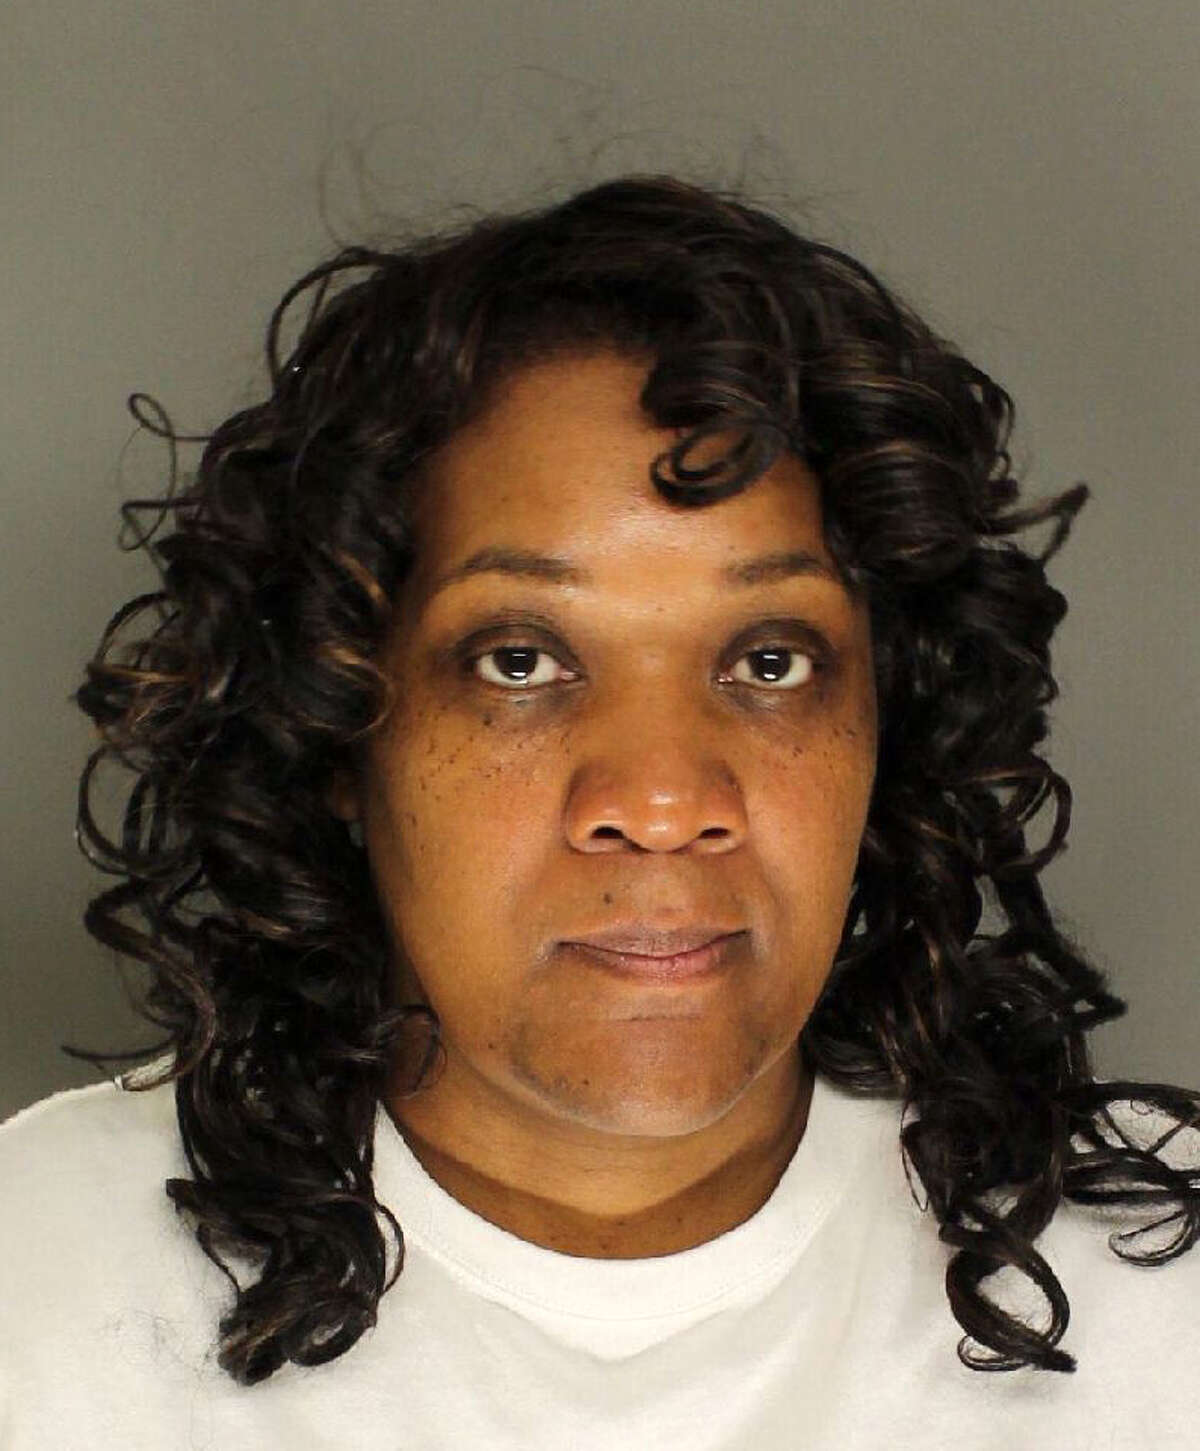 Patricia Daniels, a corrections officer was arrested in the fatal motor vehicle crash that killed Evelyn Agyei, on Boston Ave. on Dec. 4, 2014 in Bridgeport, Conn. Daniels, 46, of Bridgeport is charged with second-degree manslaughter, risk of injury to a minor and evading responsibility.